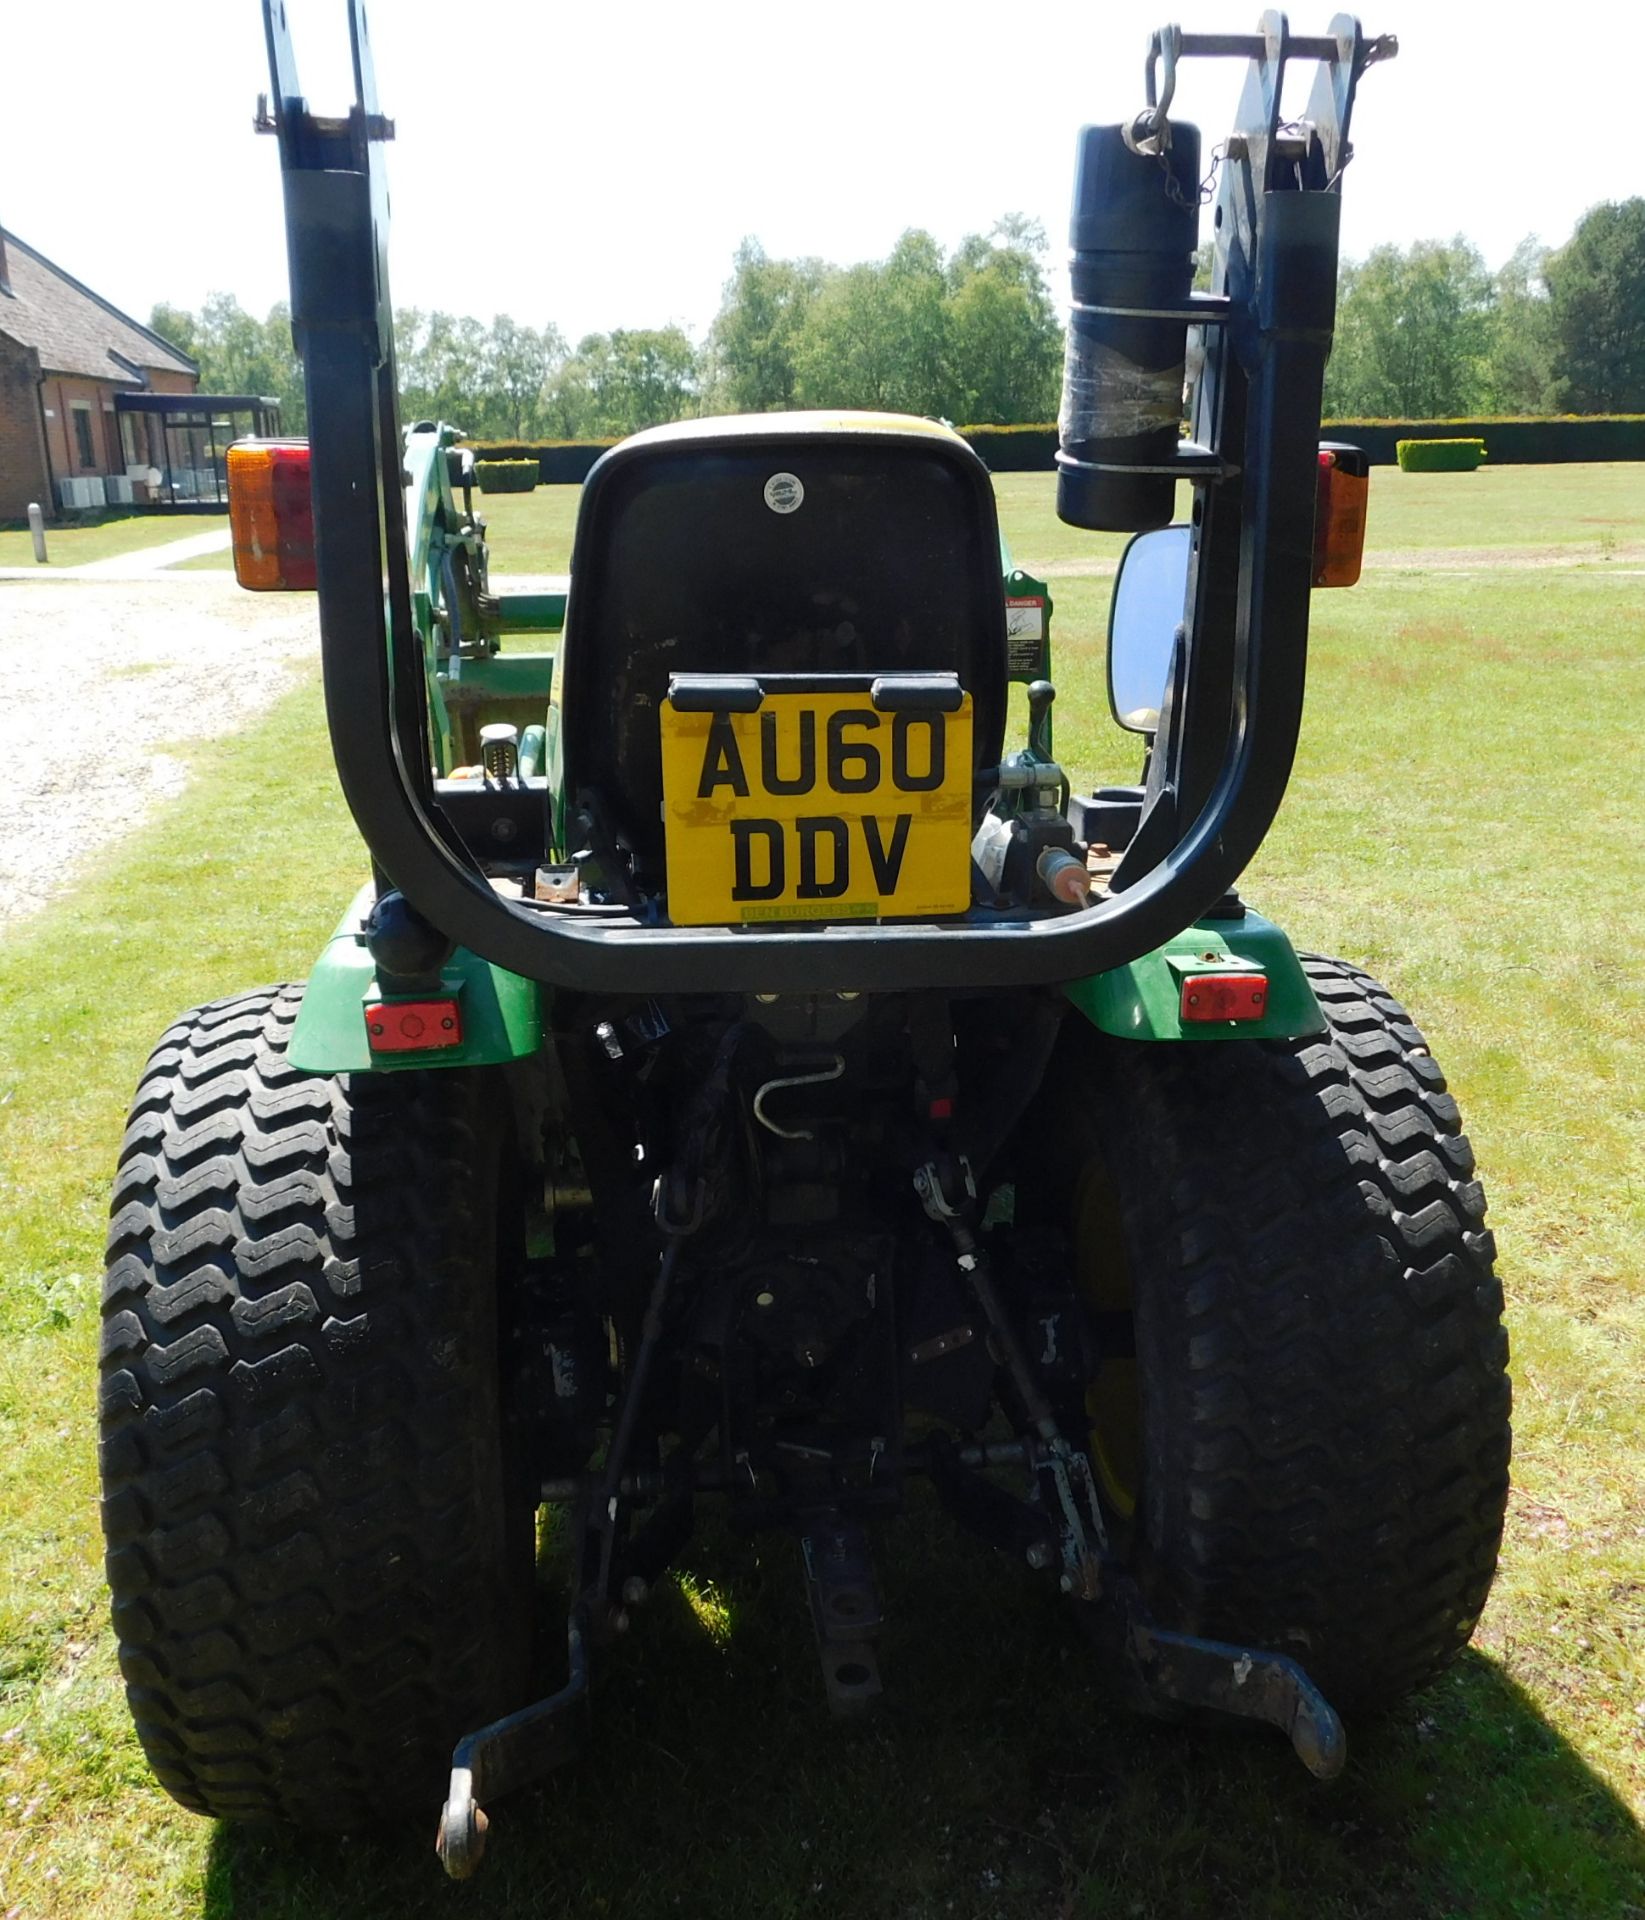 John Deere 2520 Compact Tractor, AU60 DDV, First Registered 6th January 2011, 770 Hours with Spare - Image 4 of 10